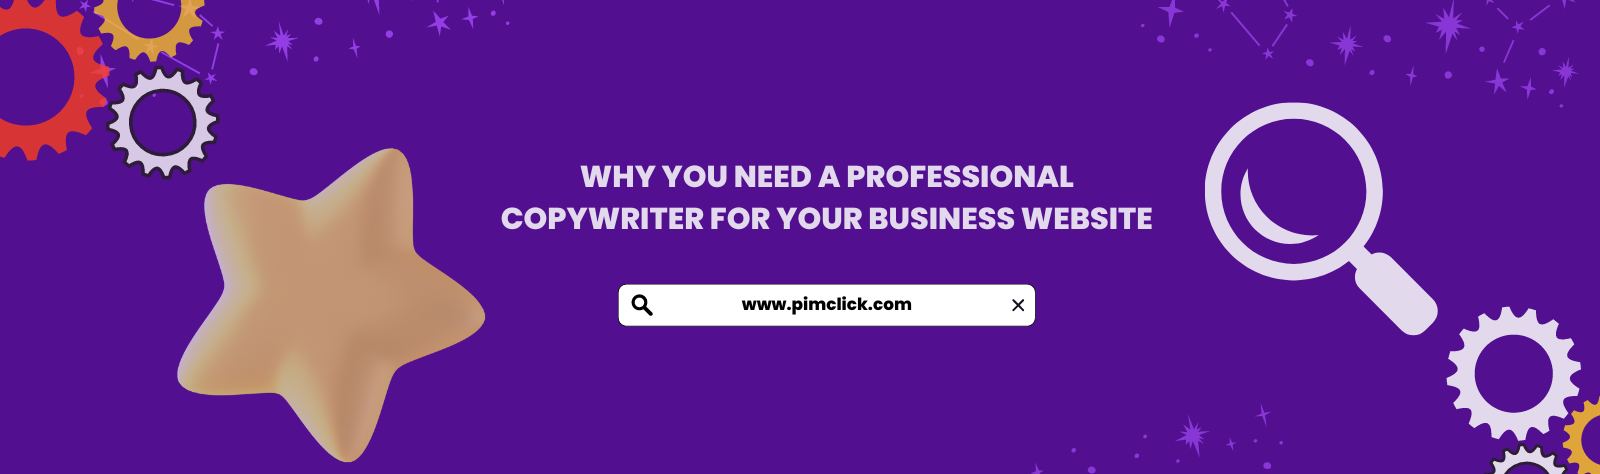 WHY YOU NEED A PROFESSIONAL COPYWRITER FOR YOUR BUSINESS WEBSITE